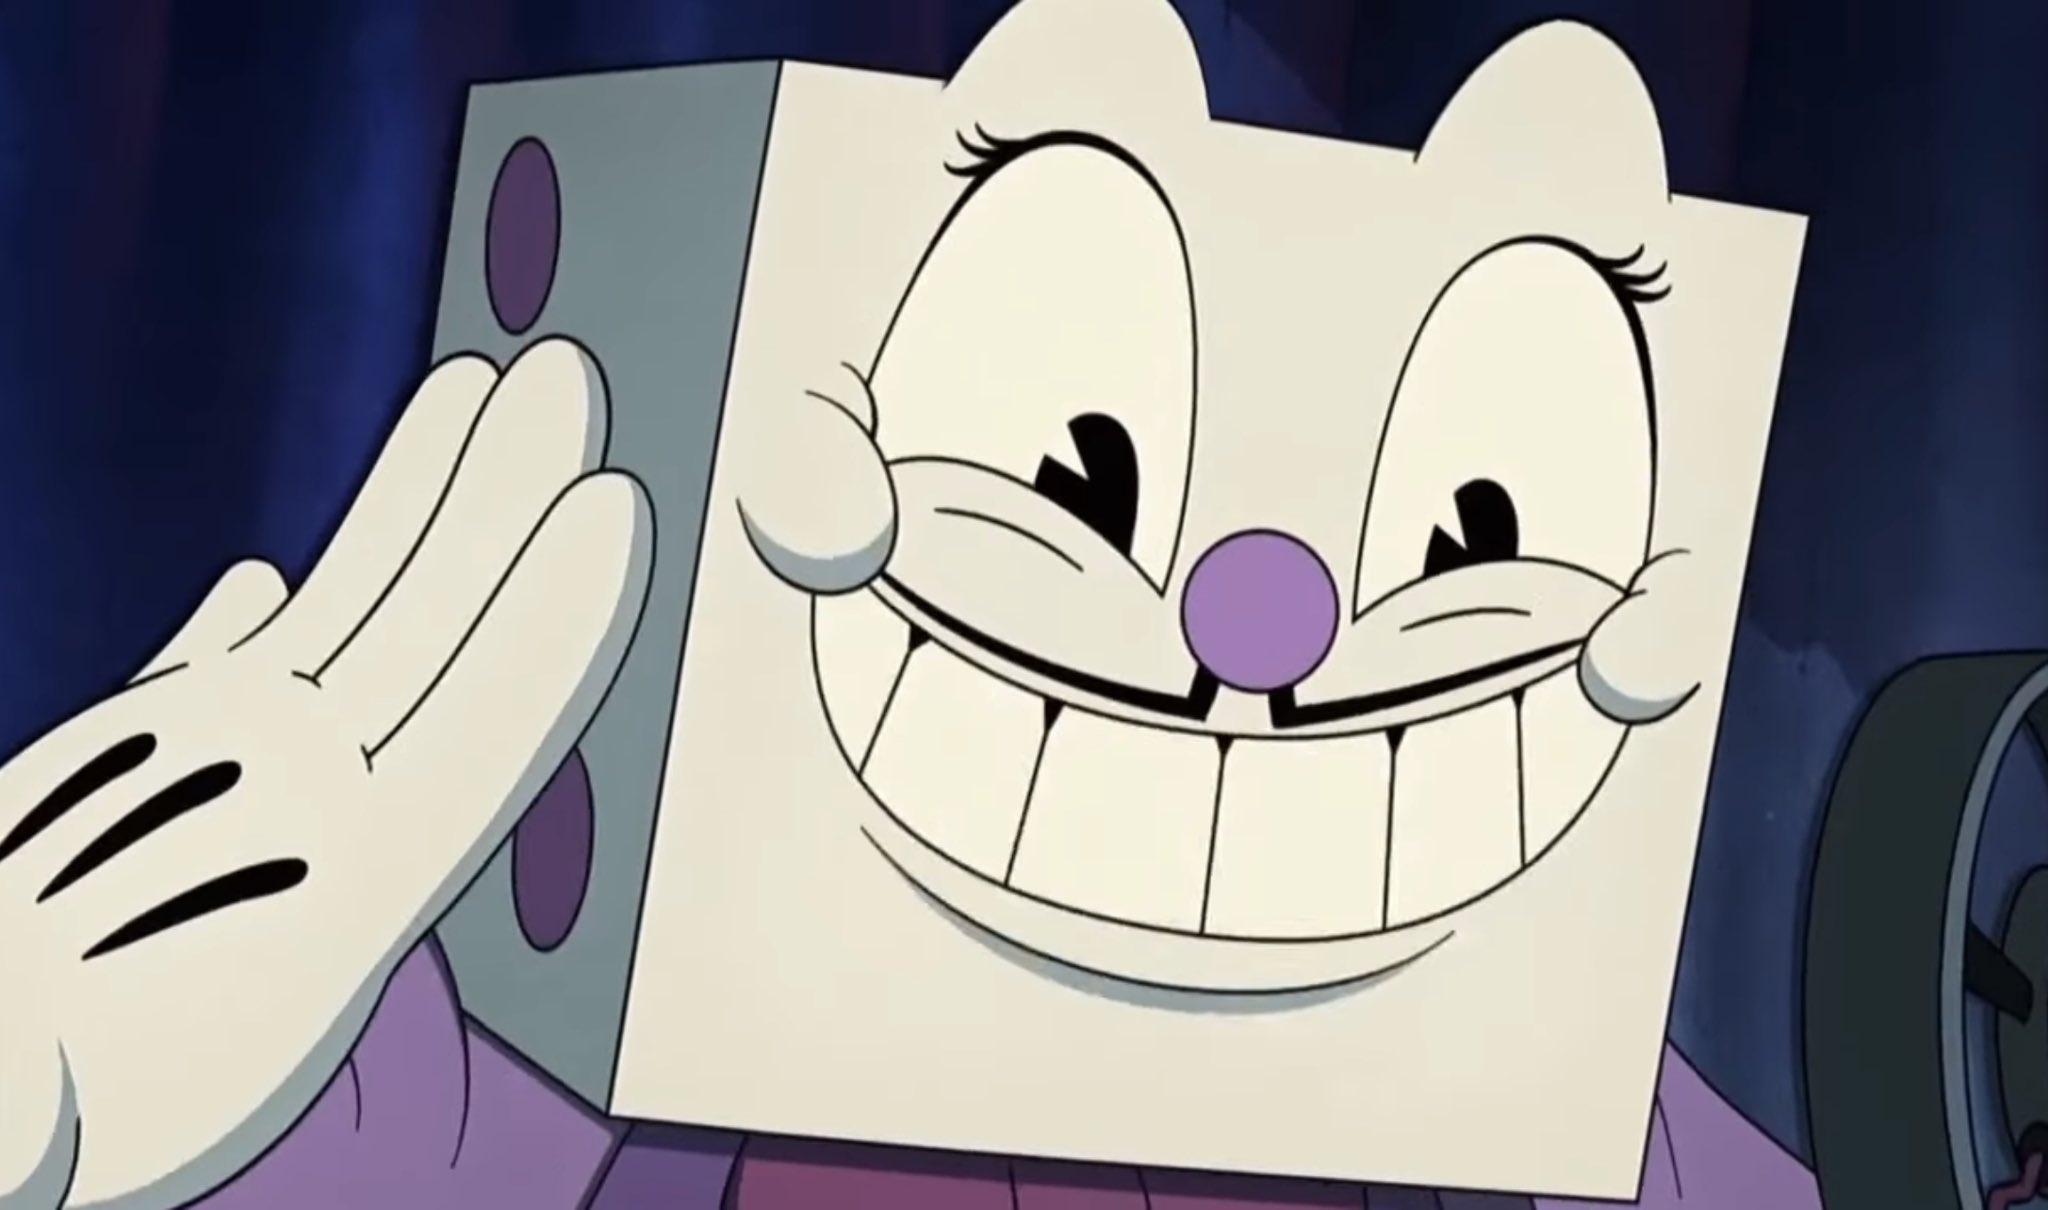 Cuphead Rolls with King Dice 🎲 The Cuphead Show!